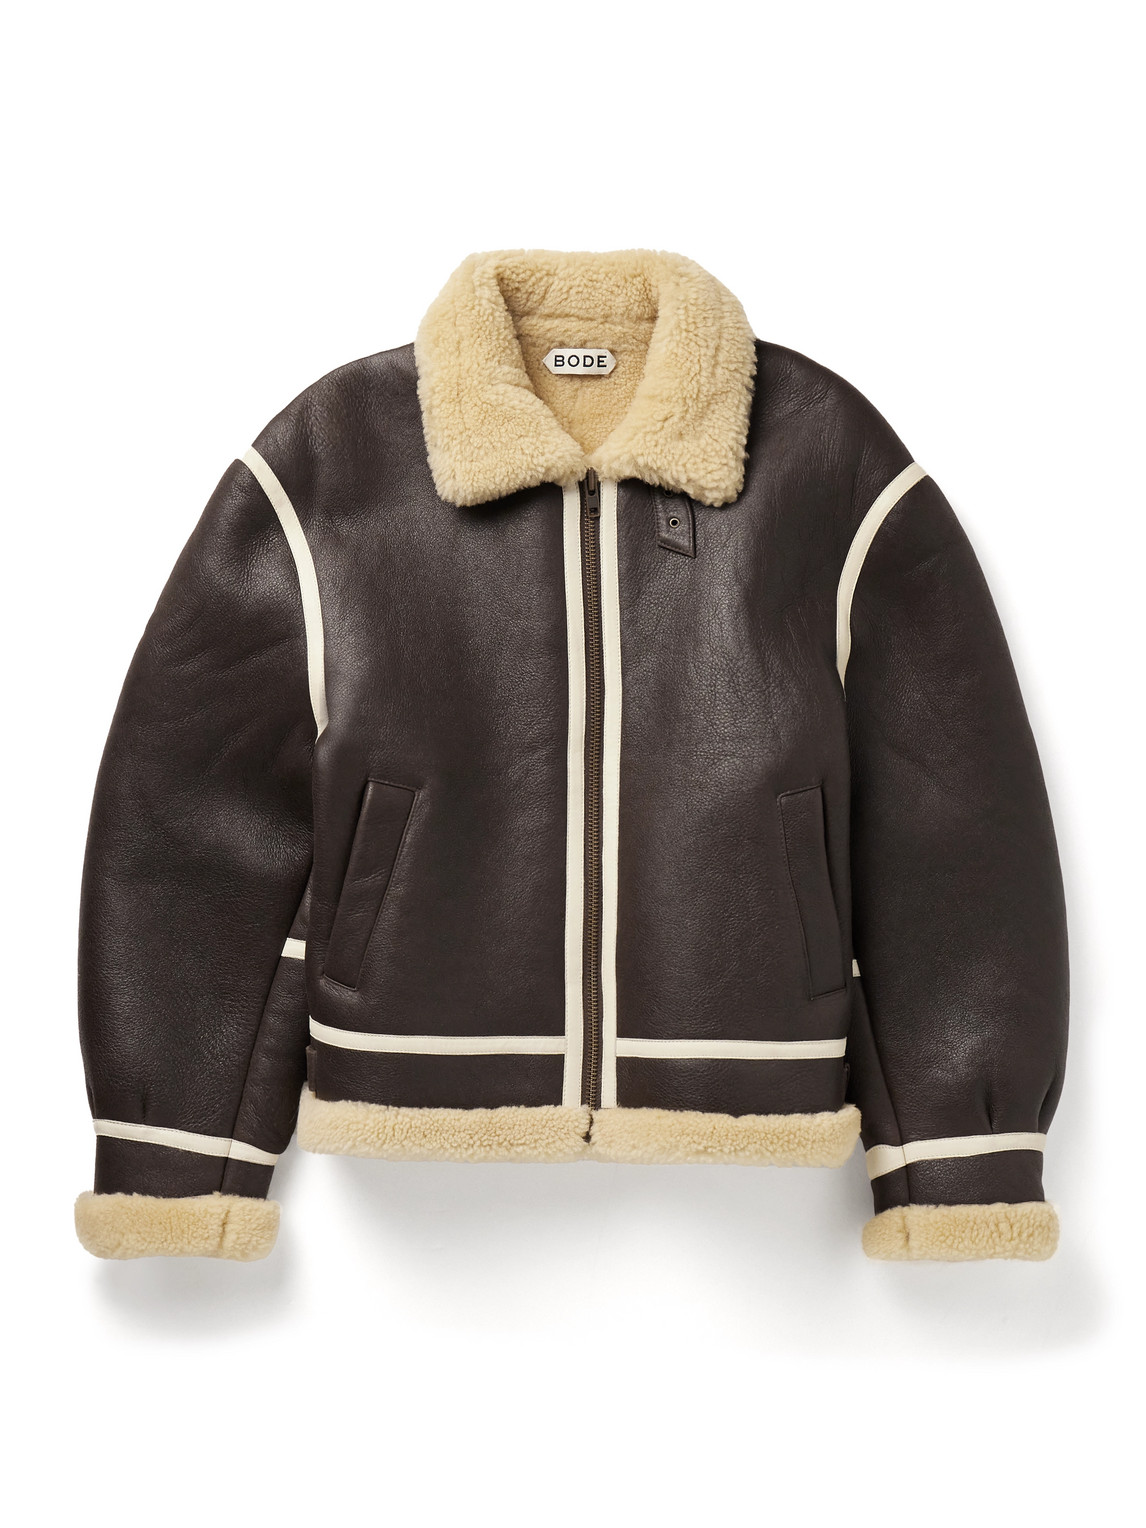 Bode Brown Aviator Leather Jacket